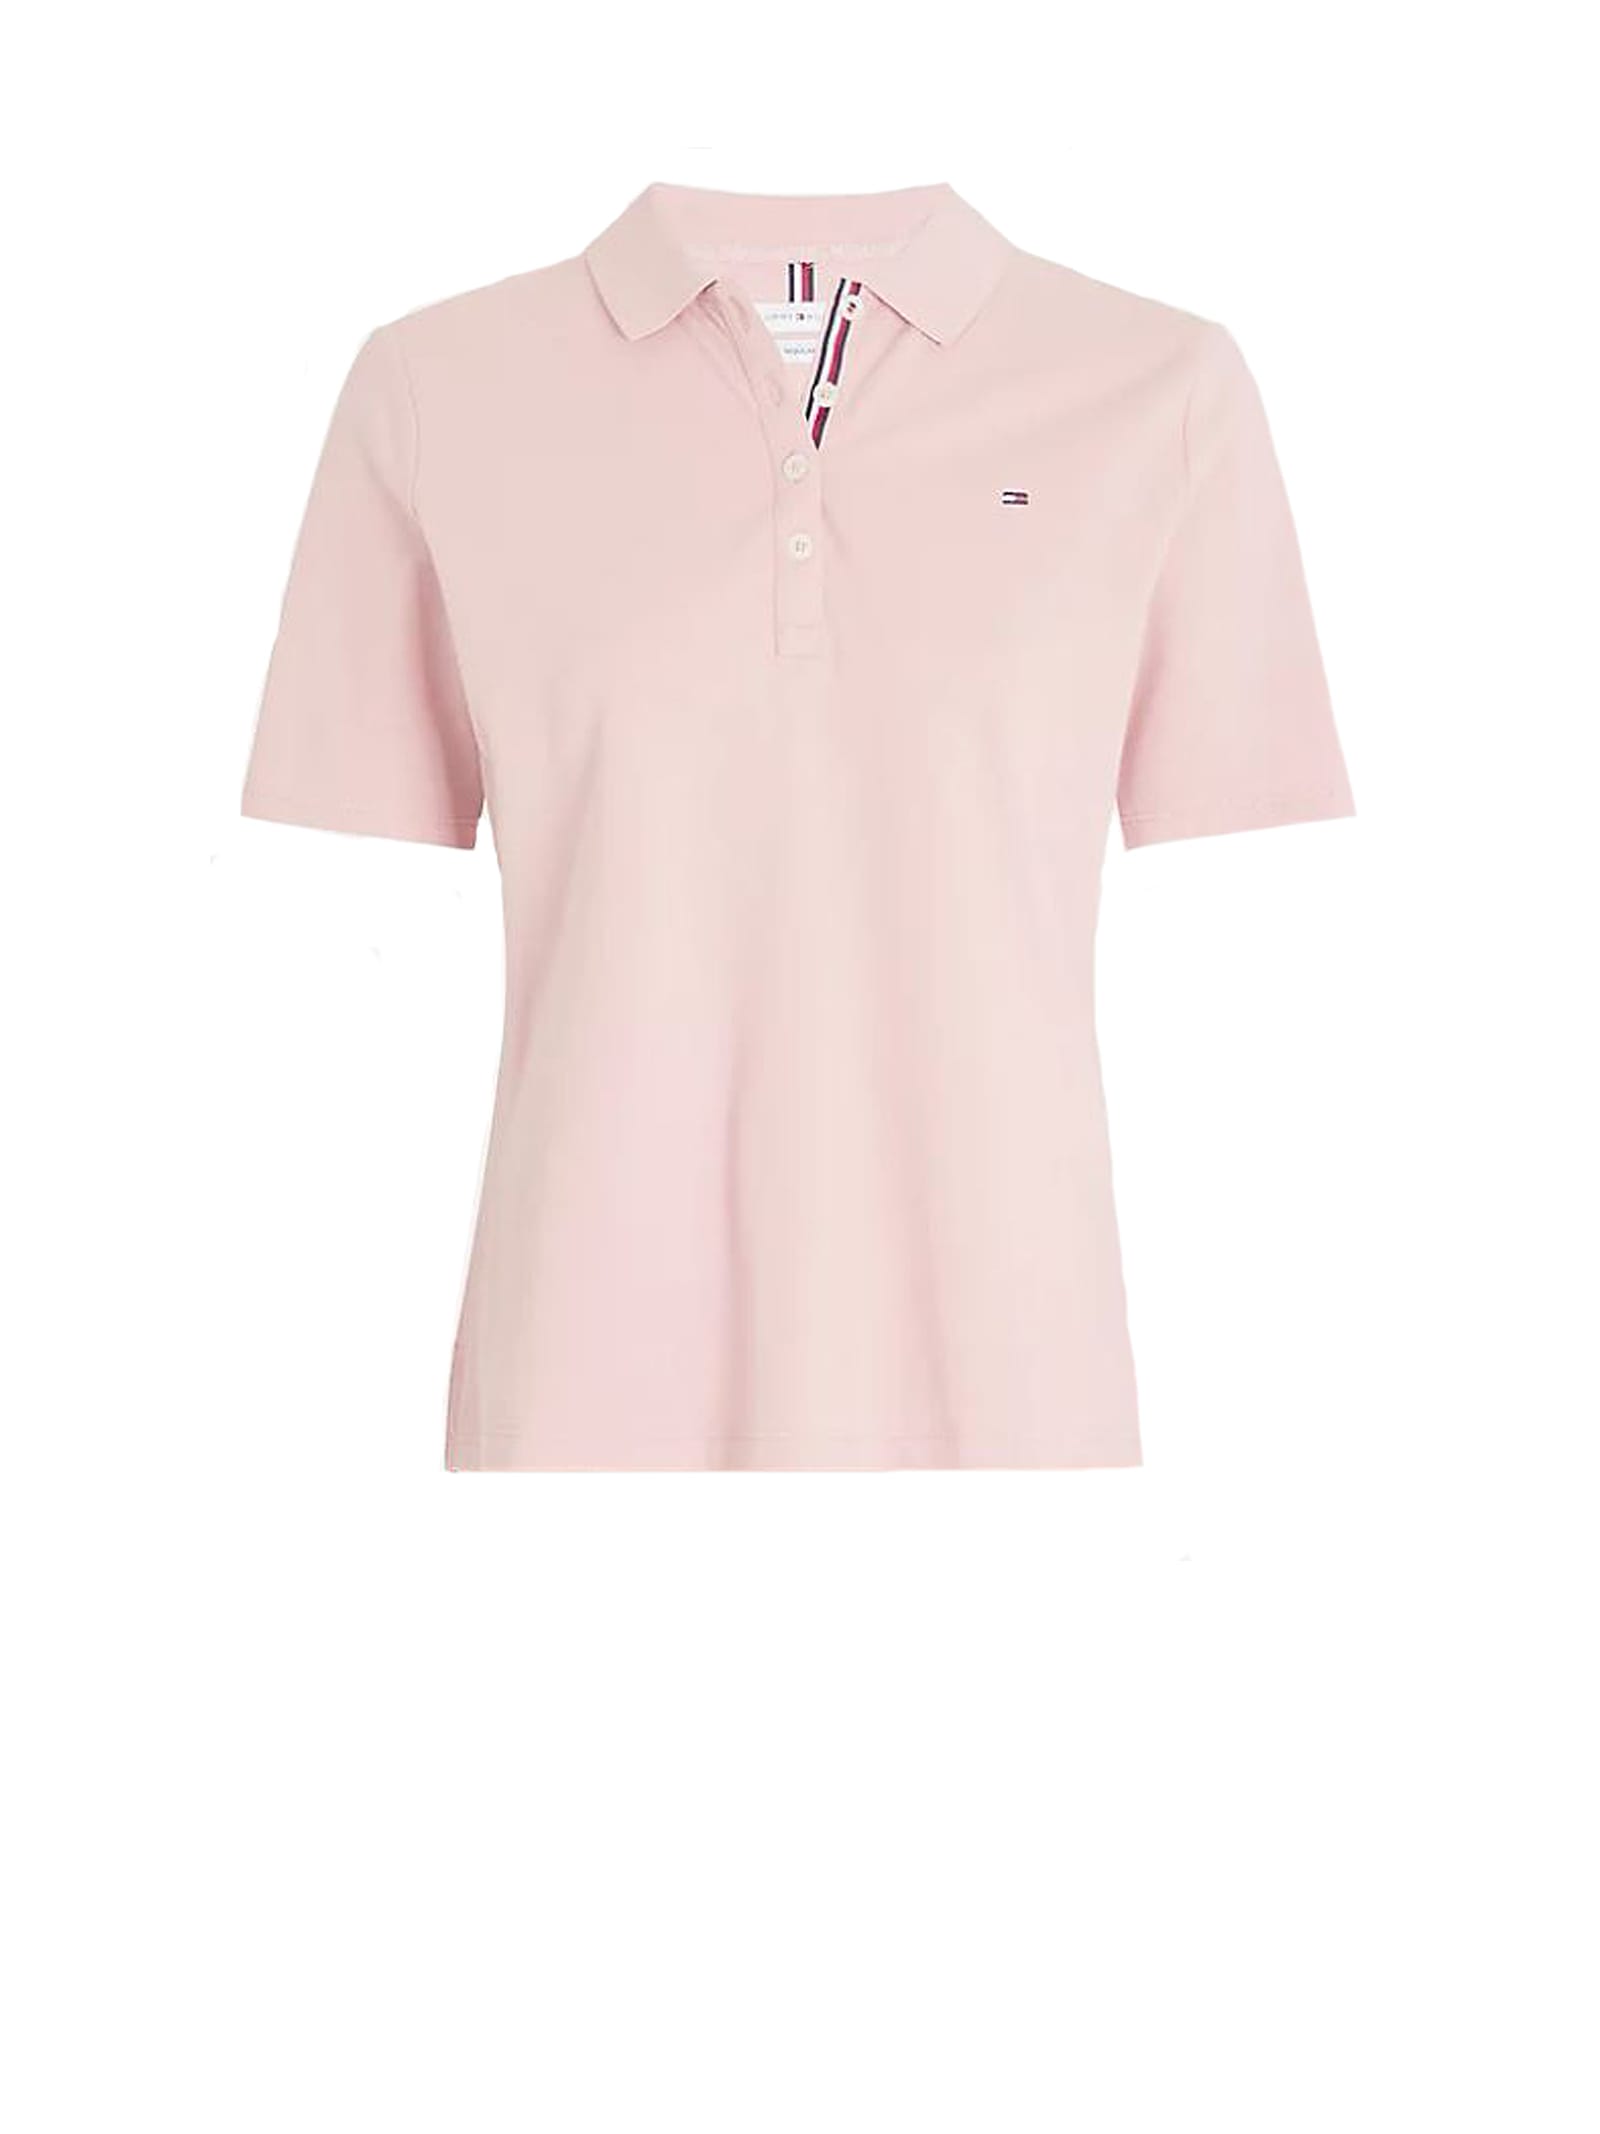 TOMMY HILFIGER POLO SHIRT IN PINK COTTON,WW0WW28578 COTONETQS